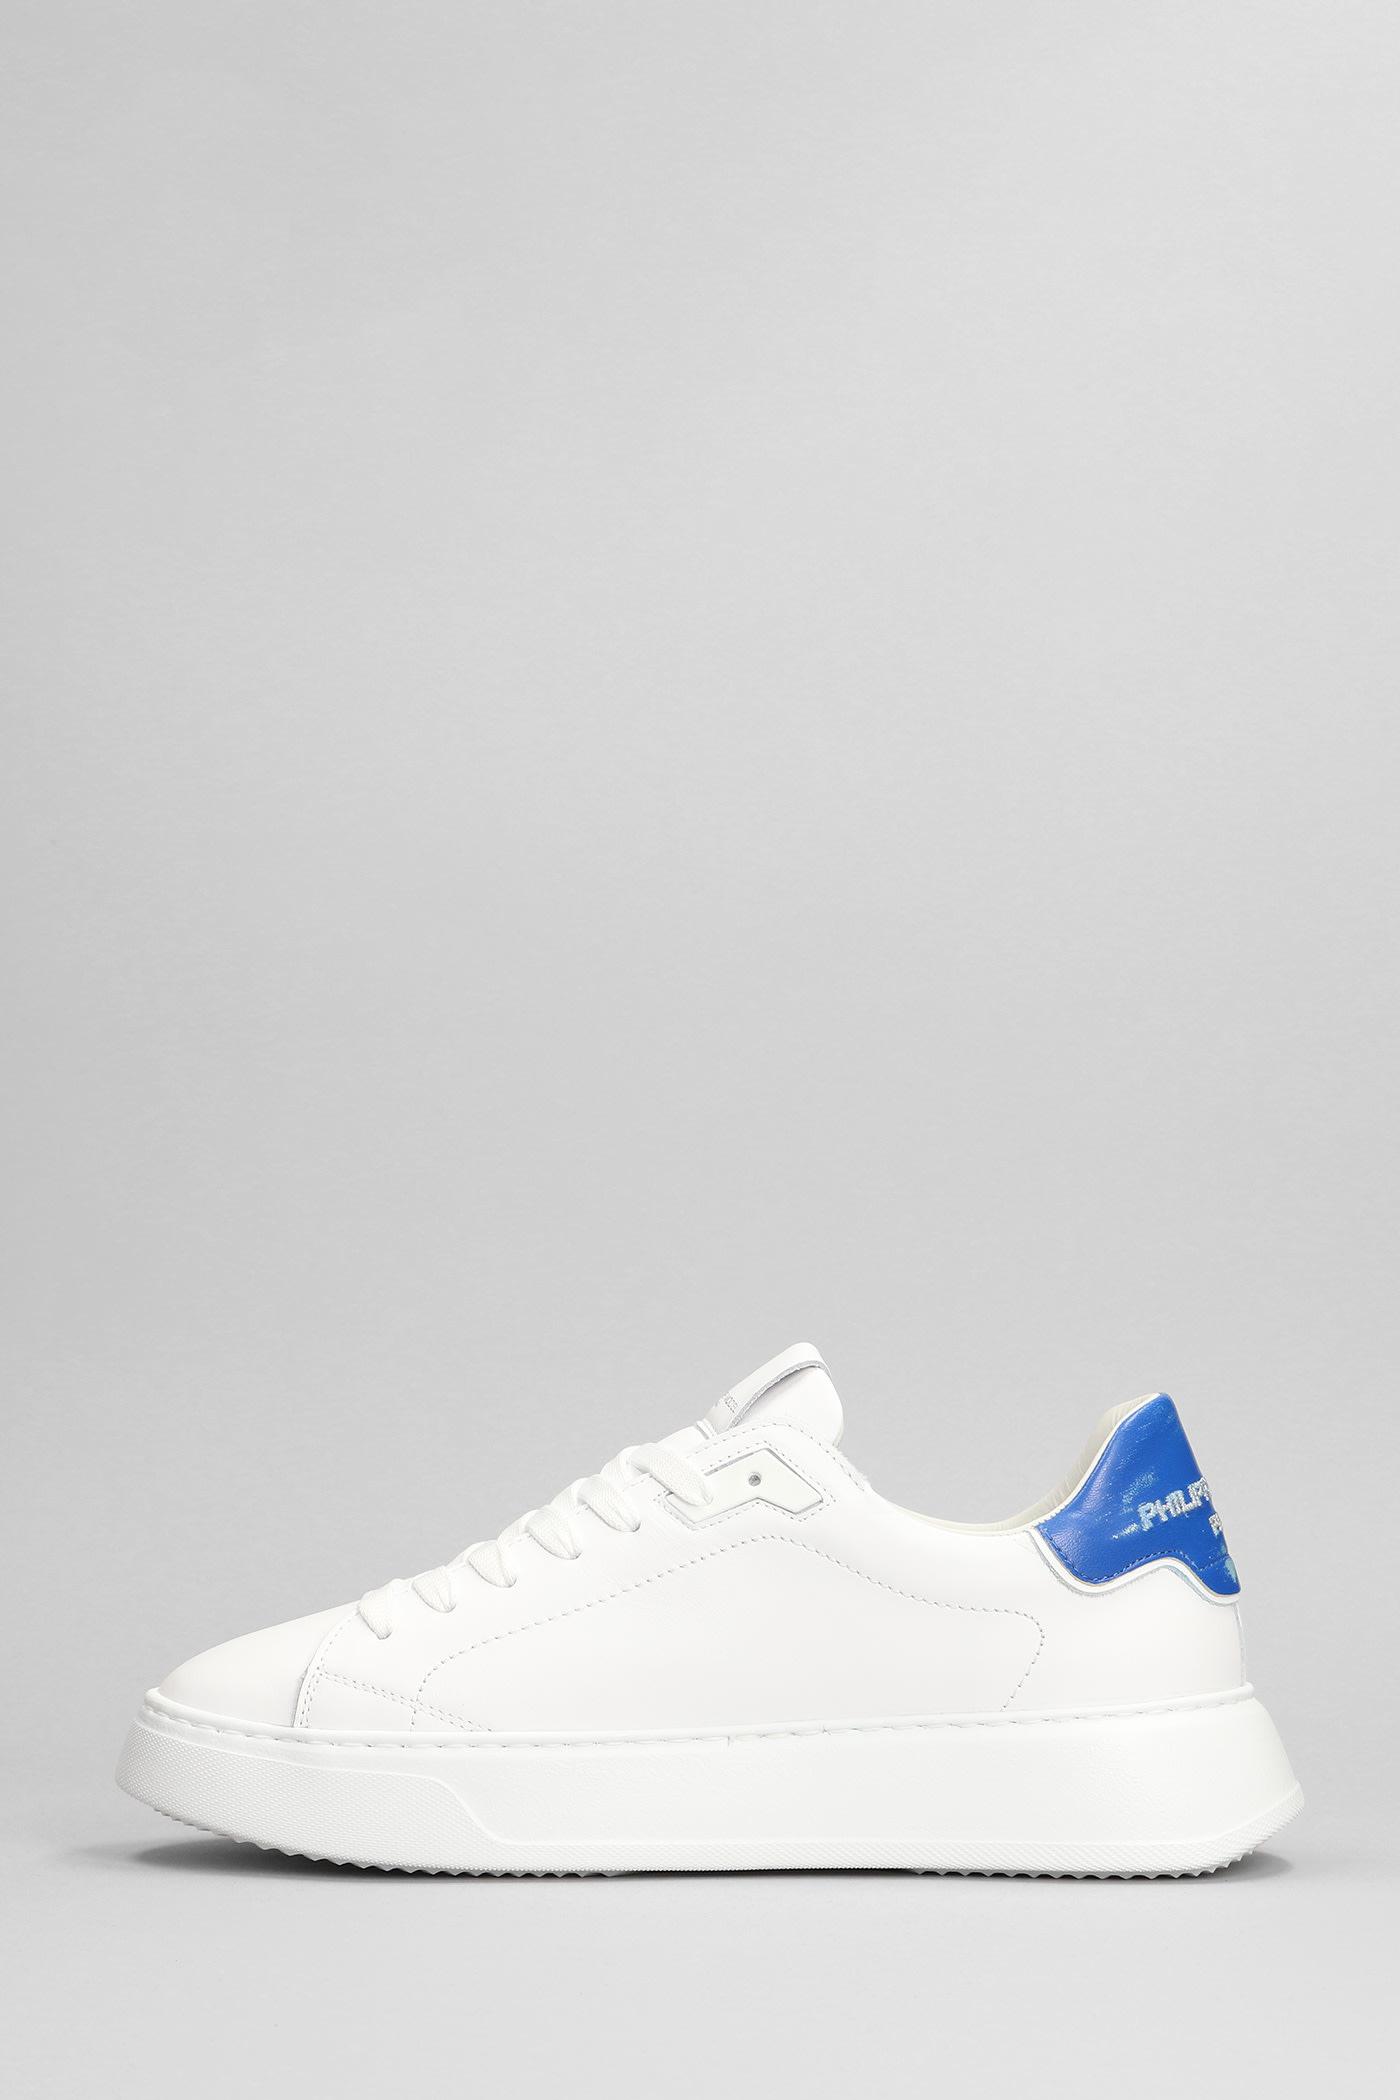 Philippe Model Temple Sneakers In White Leather for Men | Lyst